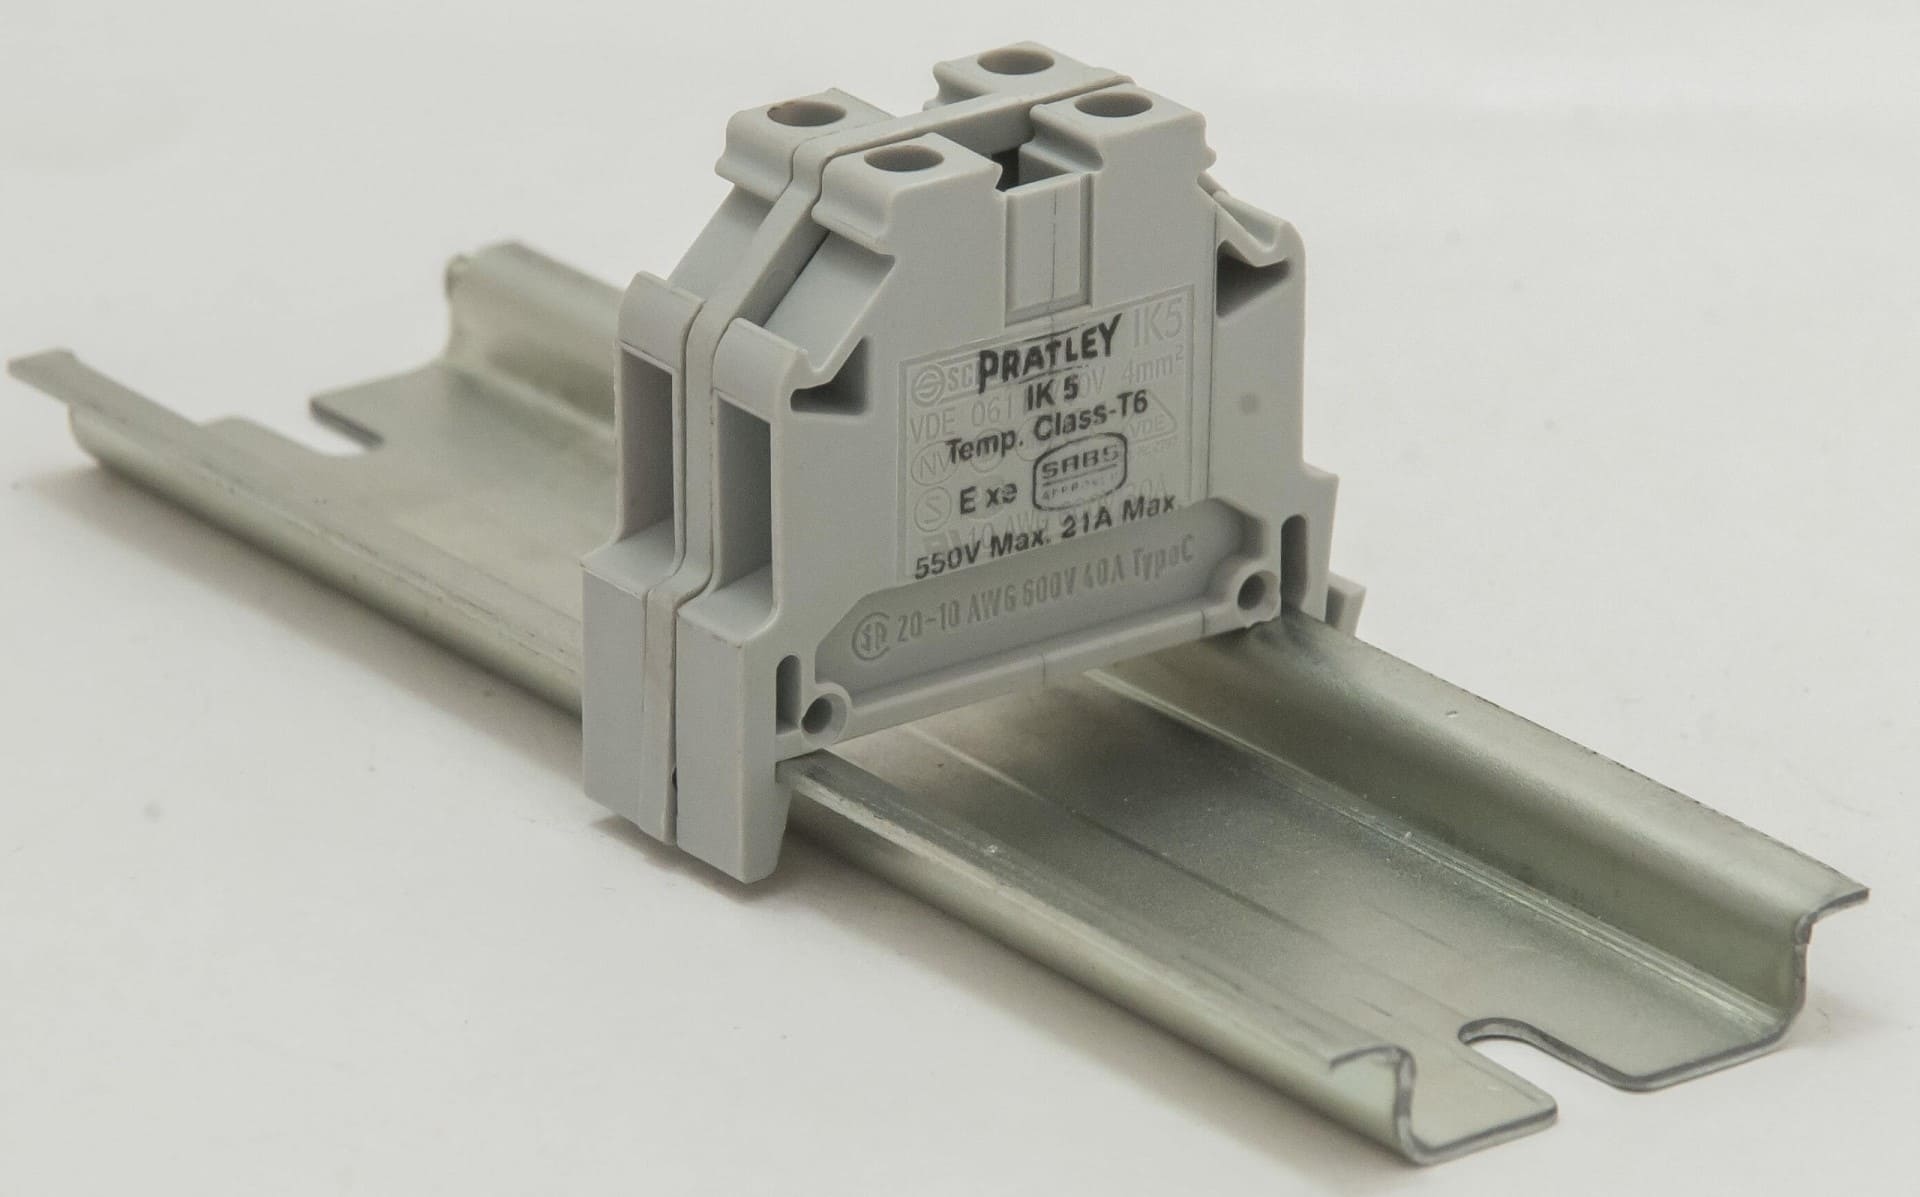 News_Virtually unbreakable terminals from Pratley